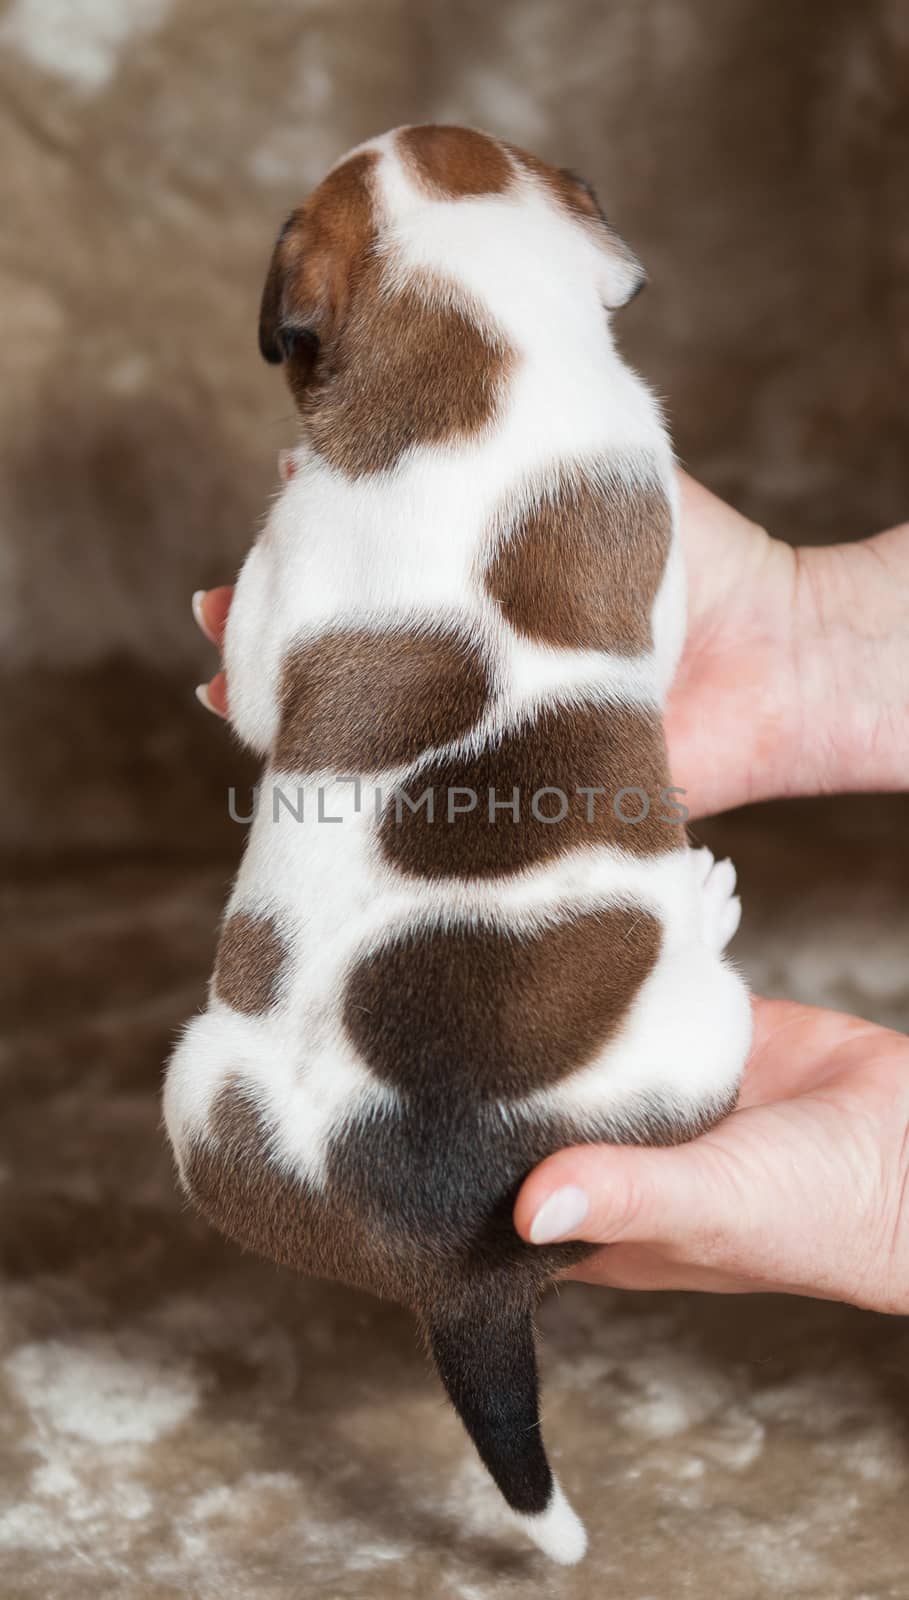 Small American Bulldog puppy on hands on light background. Back view